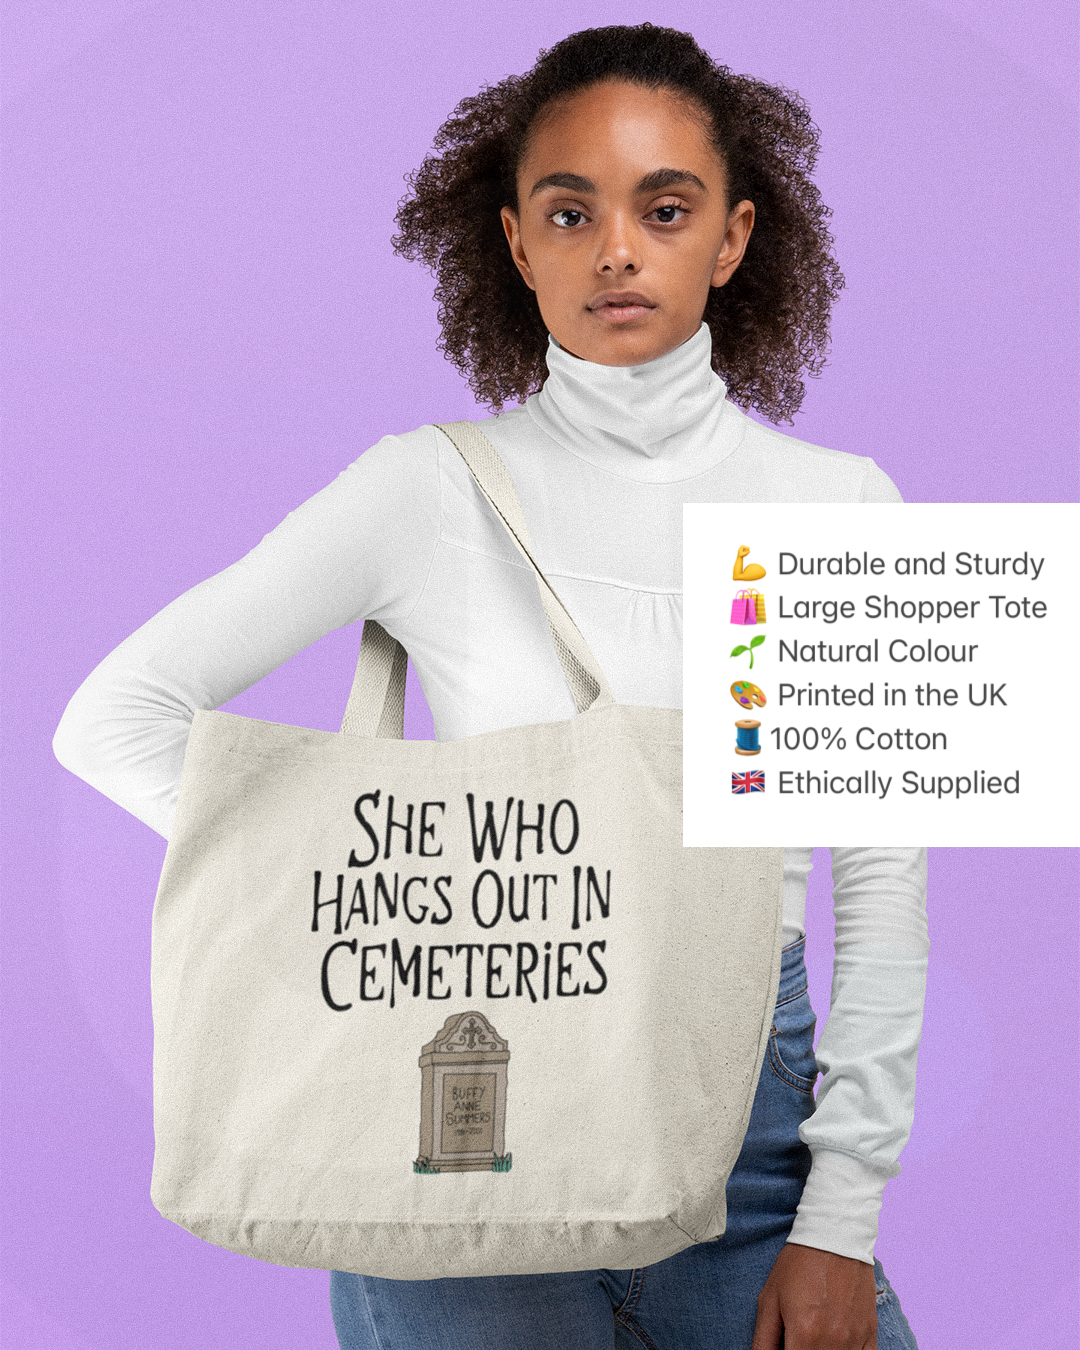 She Who Hangs Out In Cemeteries Tote Bag - Buffy The Vampire Slayer Inspired Tote Bag - Slayer Shopper Tote Bag - She Who Hangs Out In Cemeteries Buffy Inspired Tote Bag